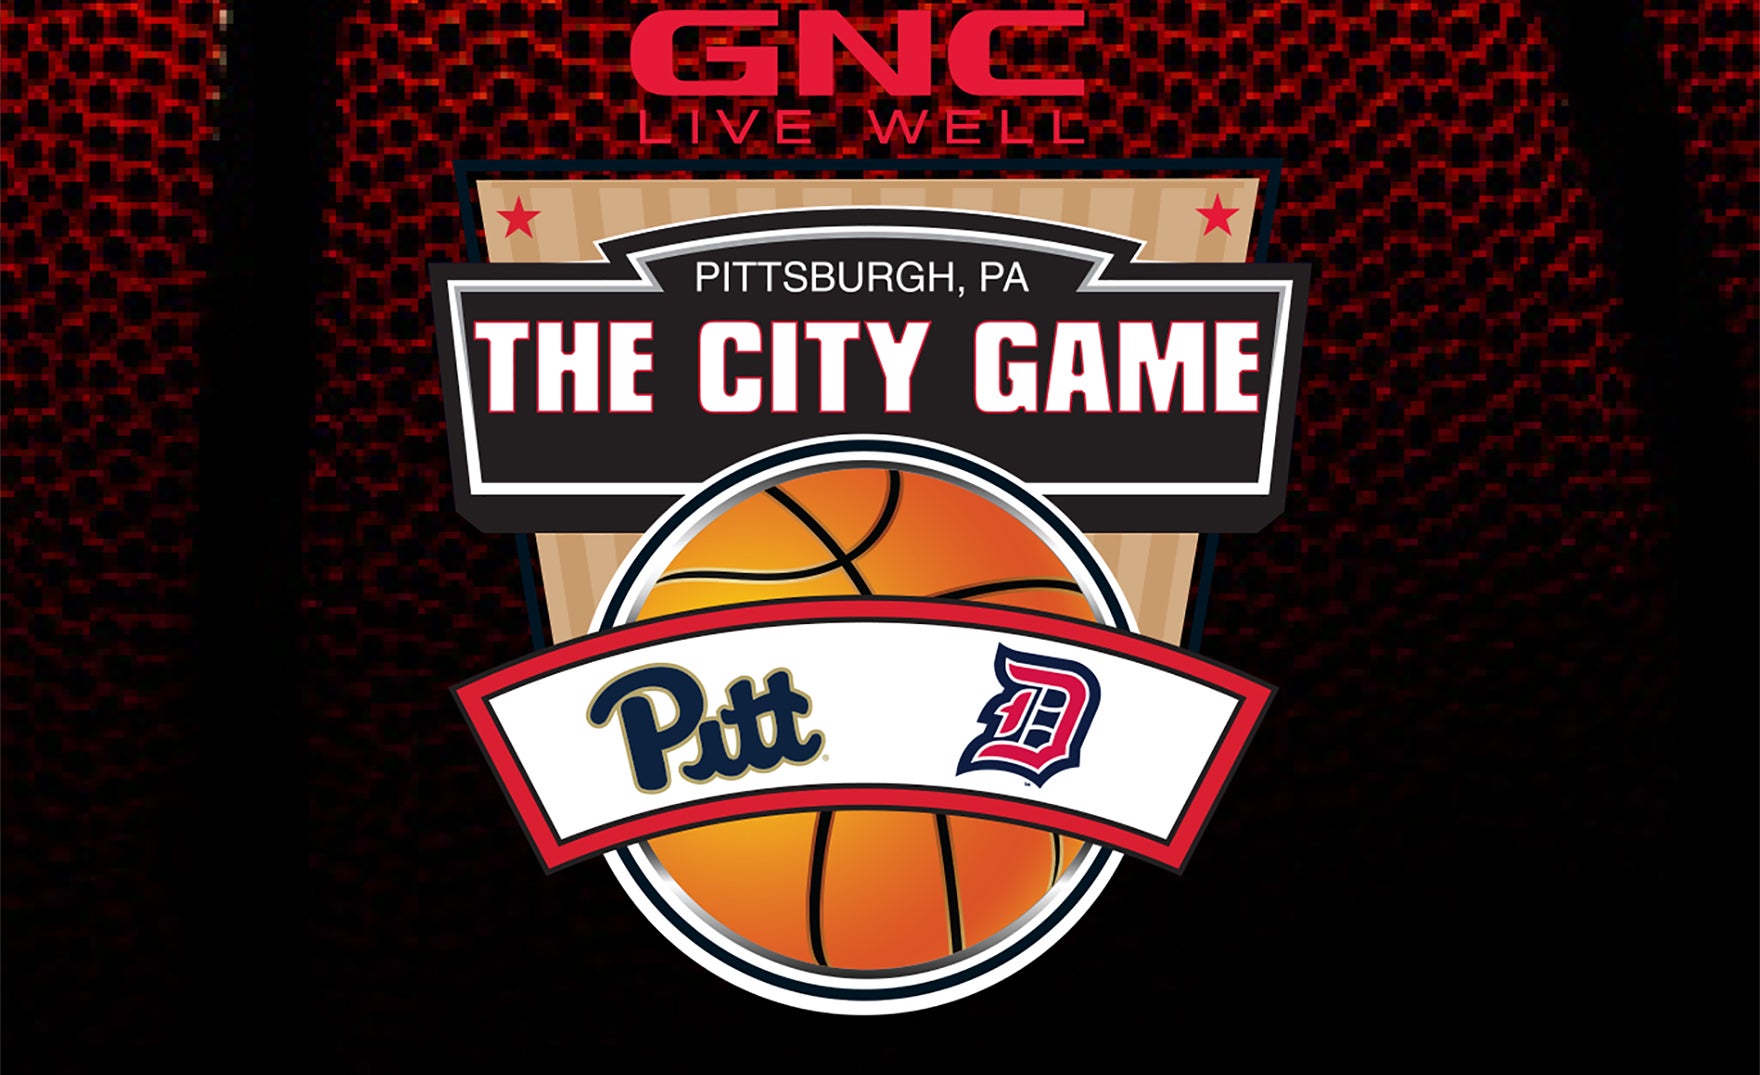 GNC Presents The City Game 